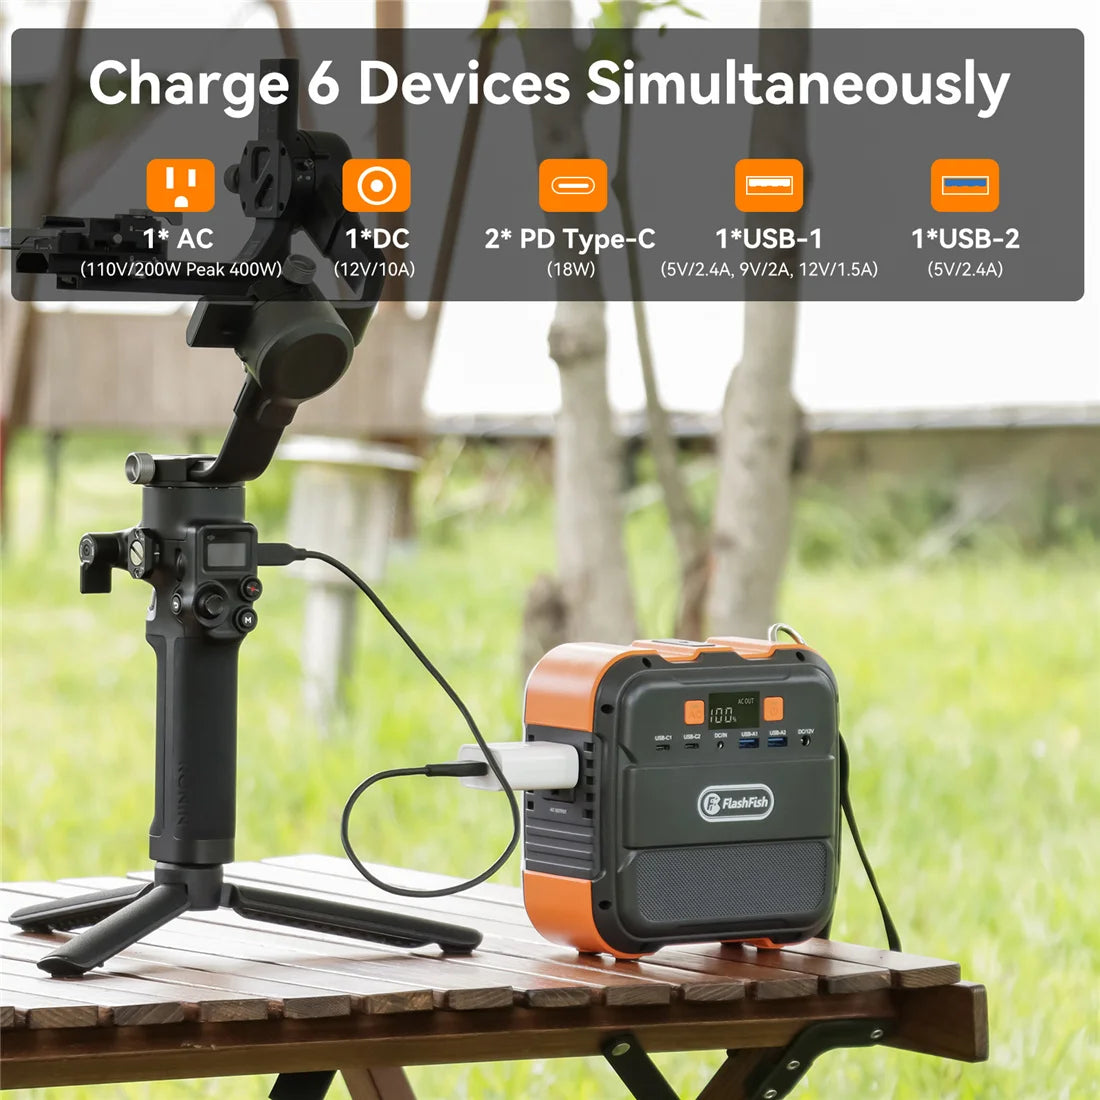 Portable power station with AC outlet, solar generator, and battery pack for camping, outdoor use, and powering devices.